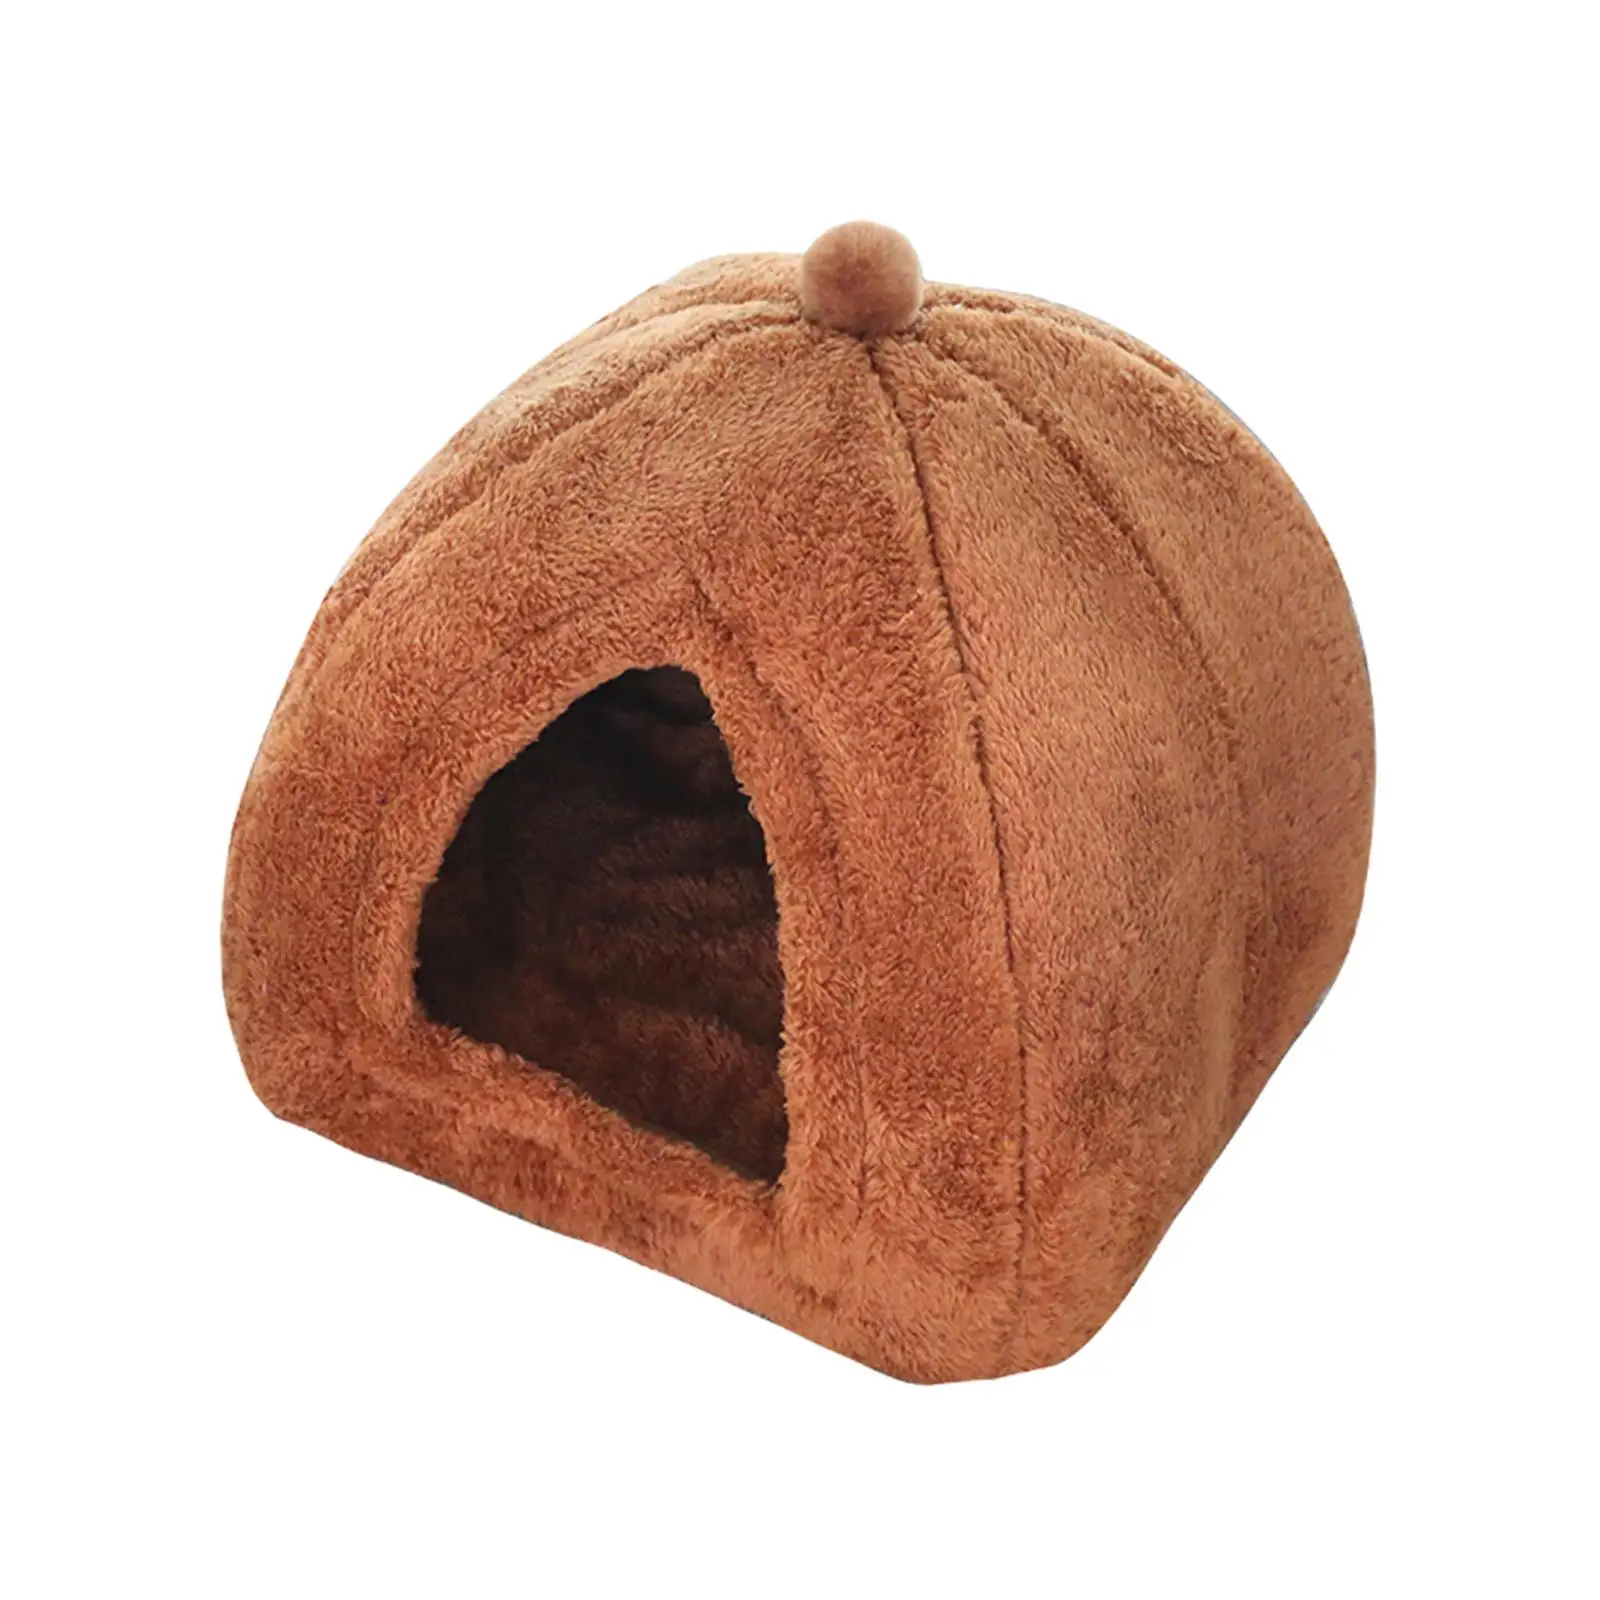 Plush cave Bed puppy Tent Semi Enclosed Comfortable for Small Animals